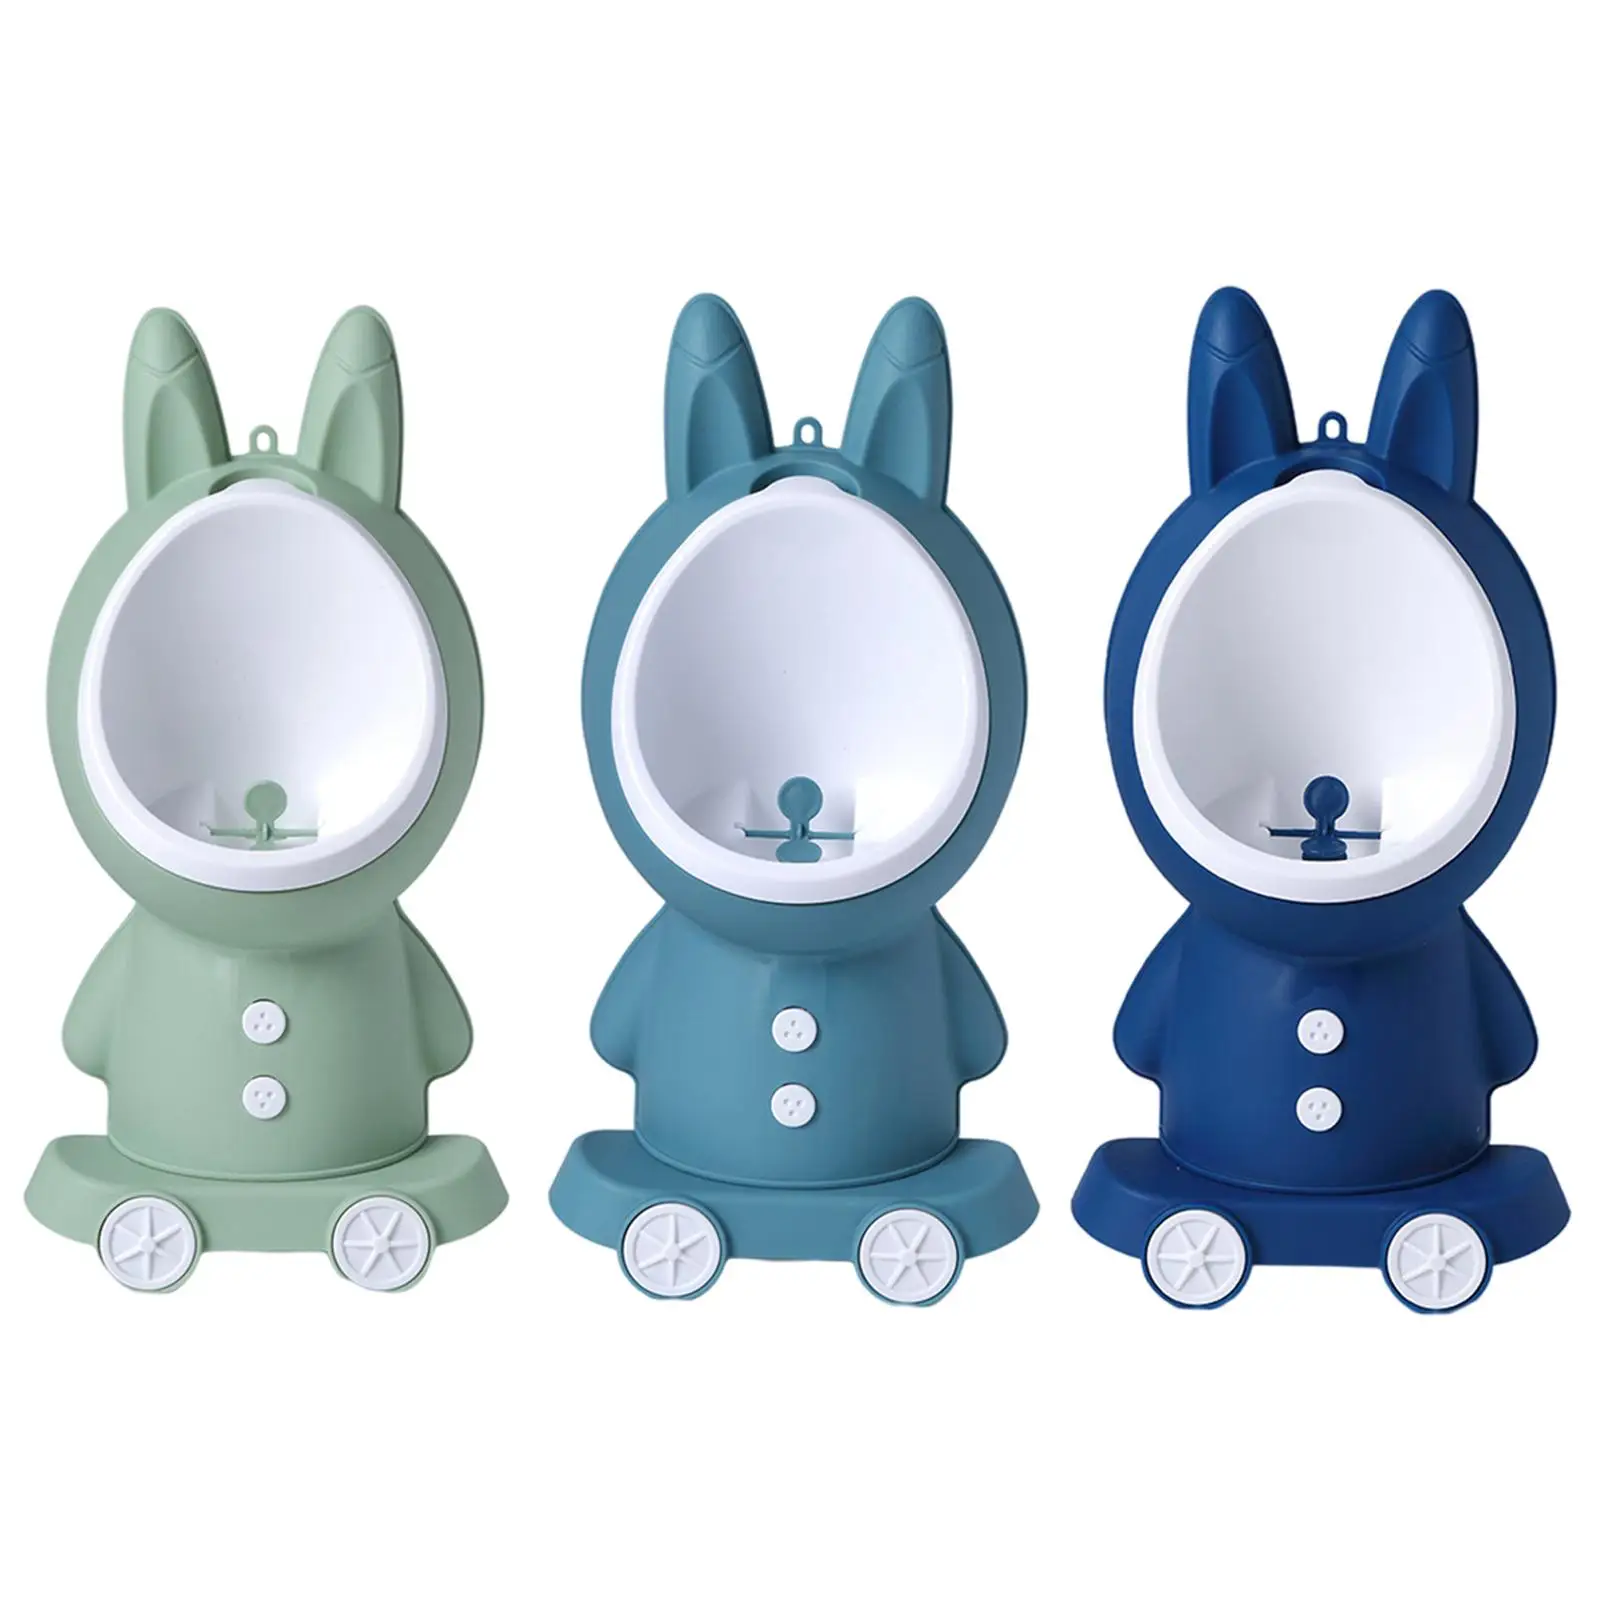 Cute Rabbit Little Boys Pee Toilet Kids Potty Urinal to 6 Years Old